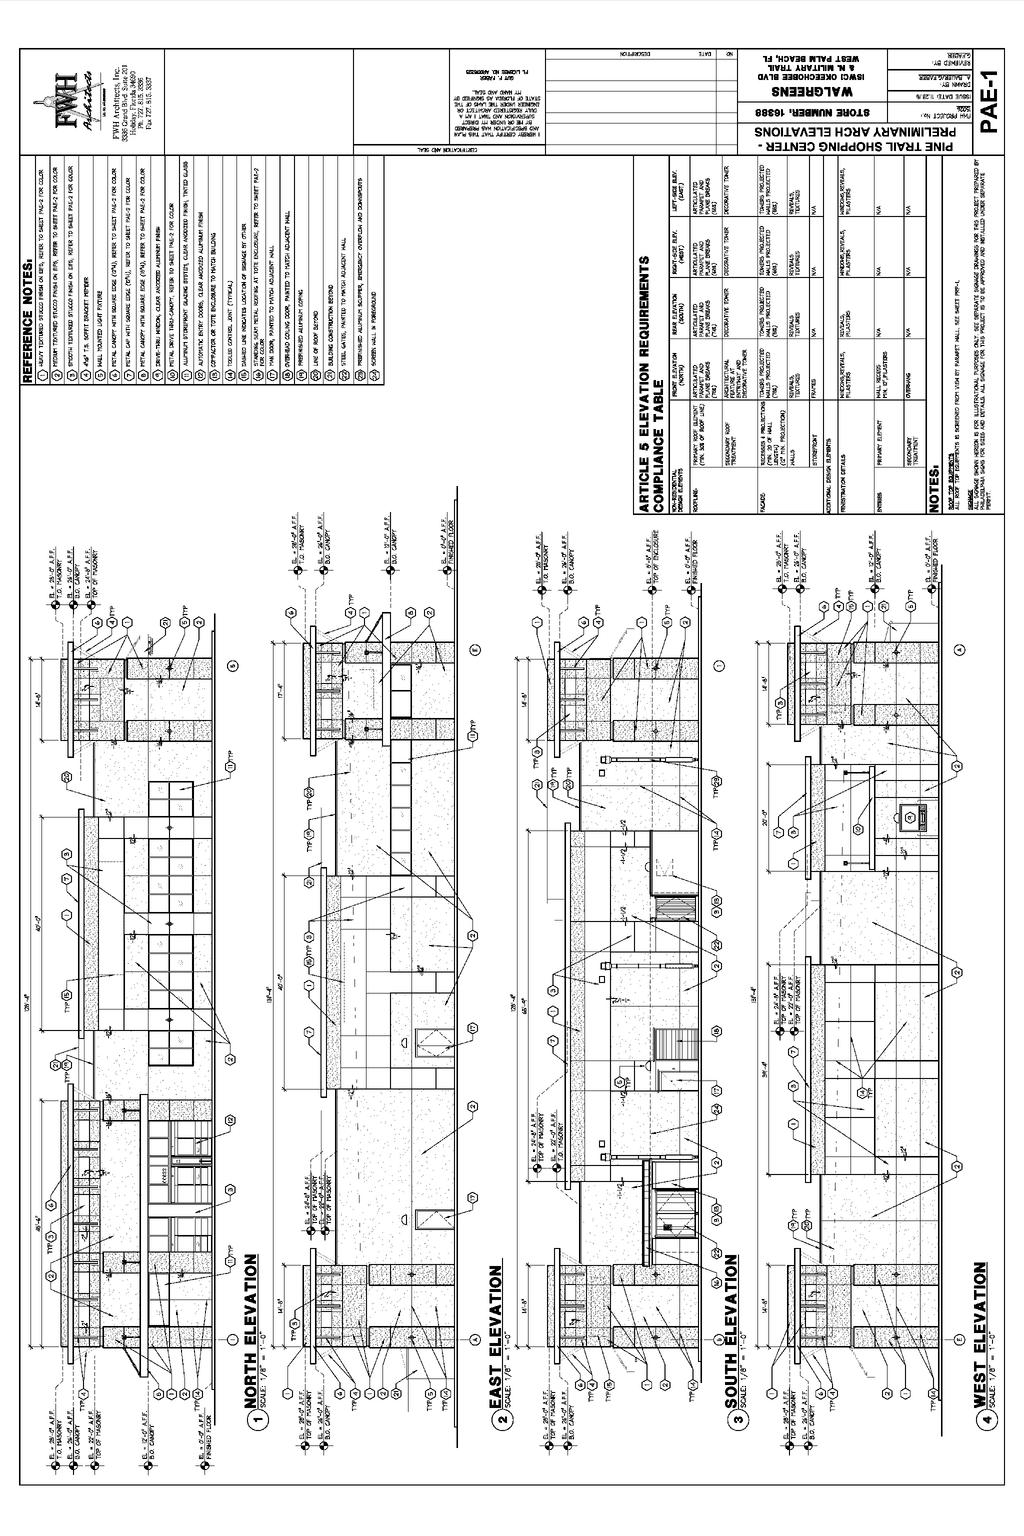 Figure 9 - Preliminary Architectural Elevations Building 1